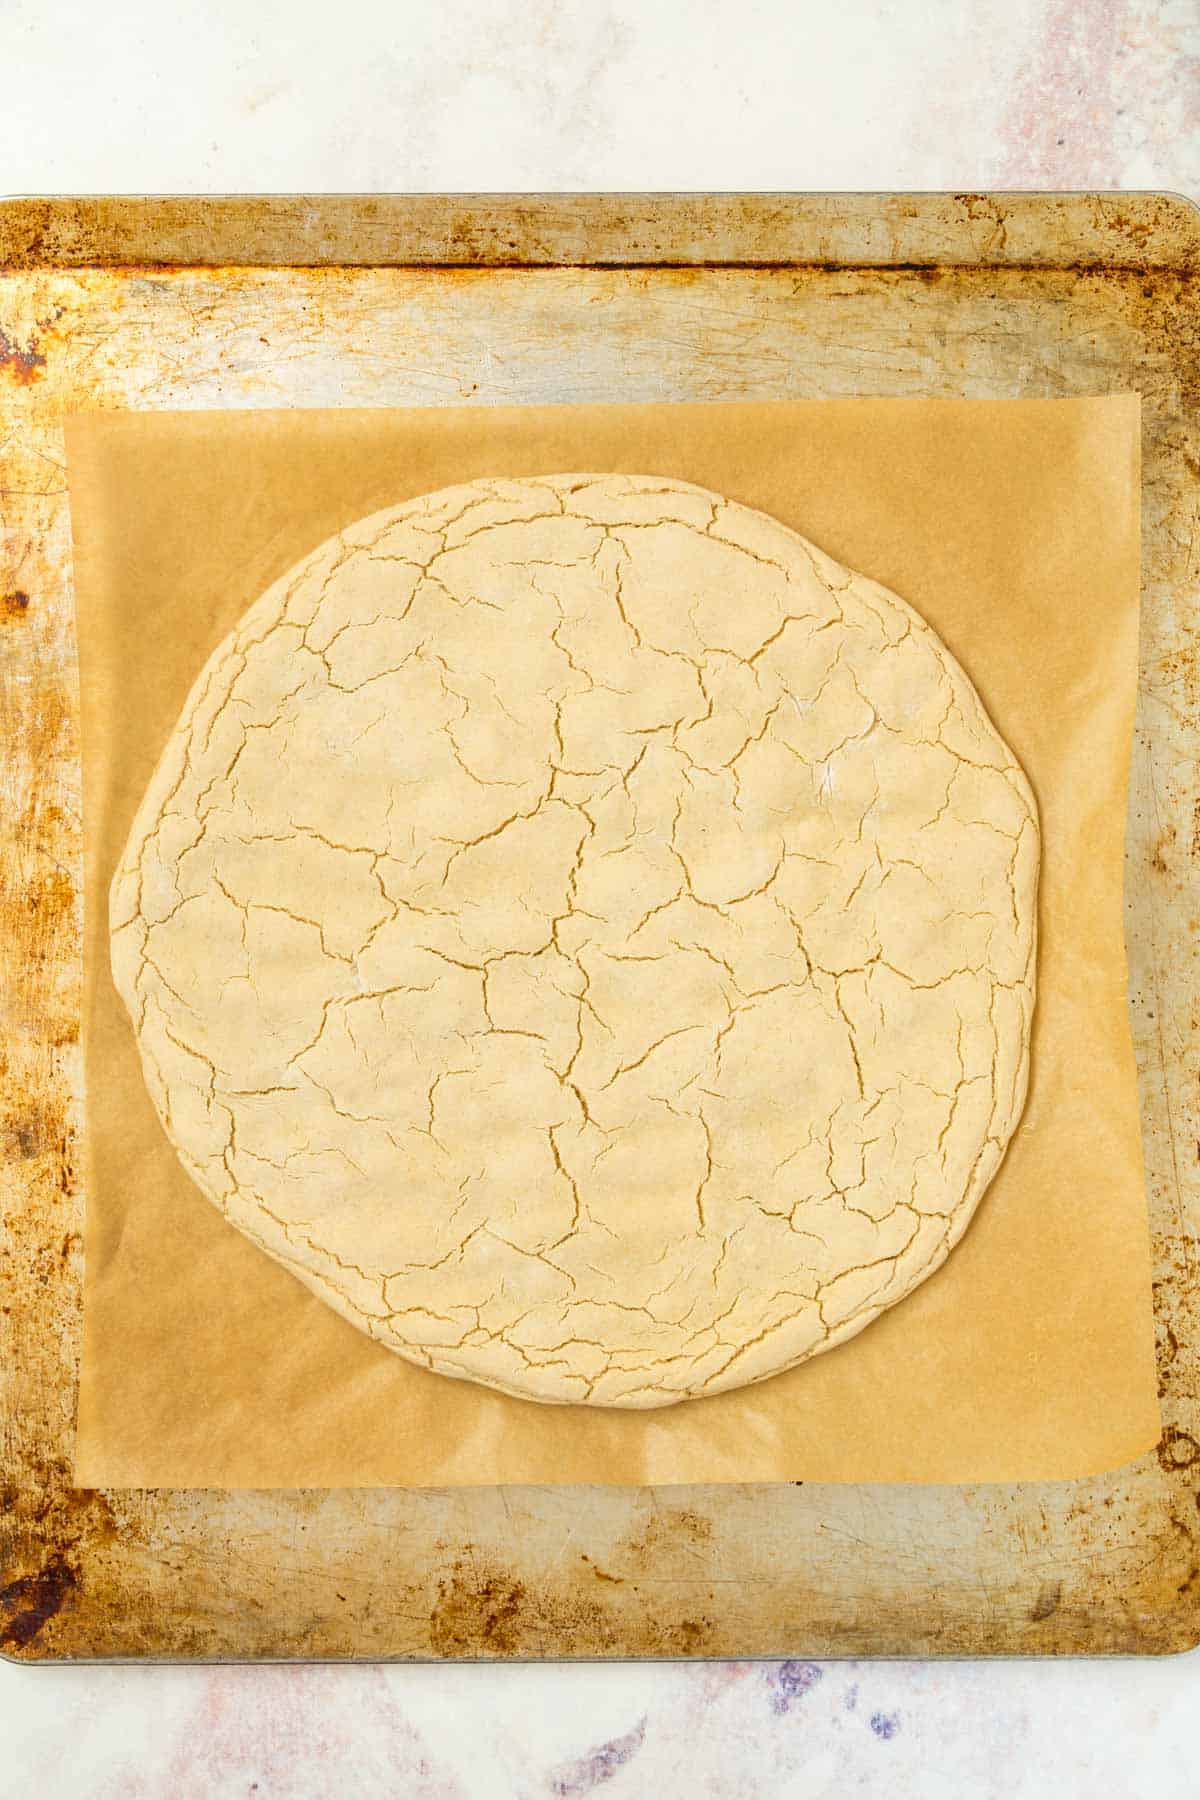 par-baked pizza crust on a parchment lined baking sheet